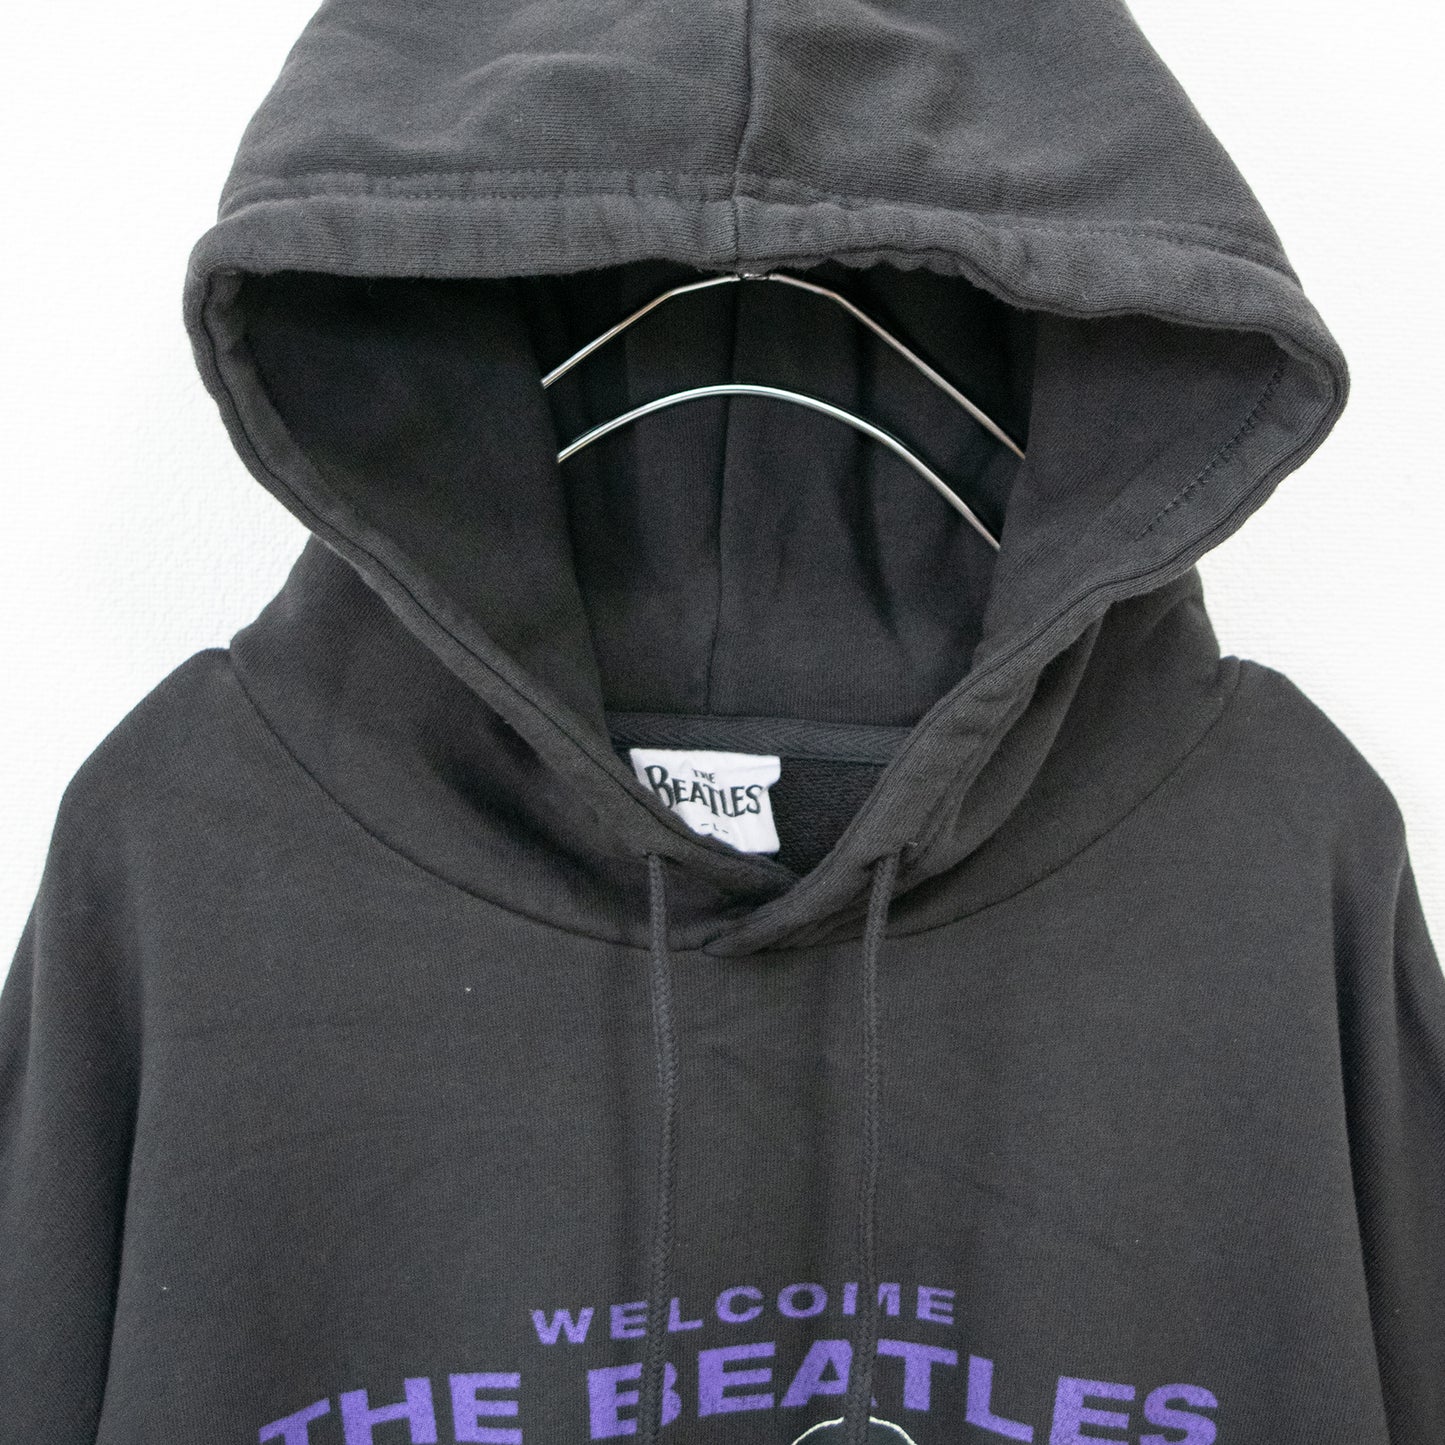 THE BEATLES Ticket Pullover Sweatshirt - YOUAREMYPOISON